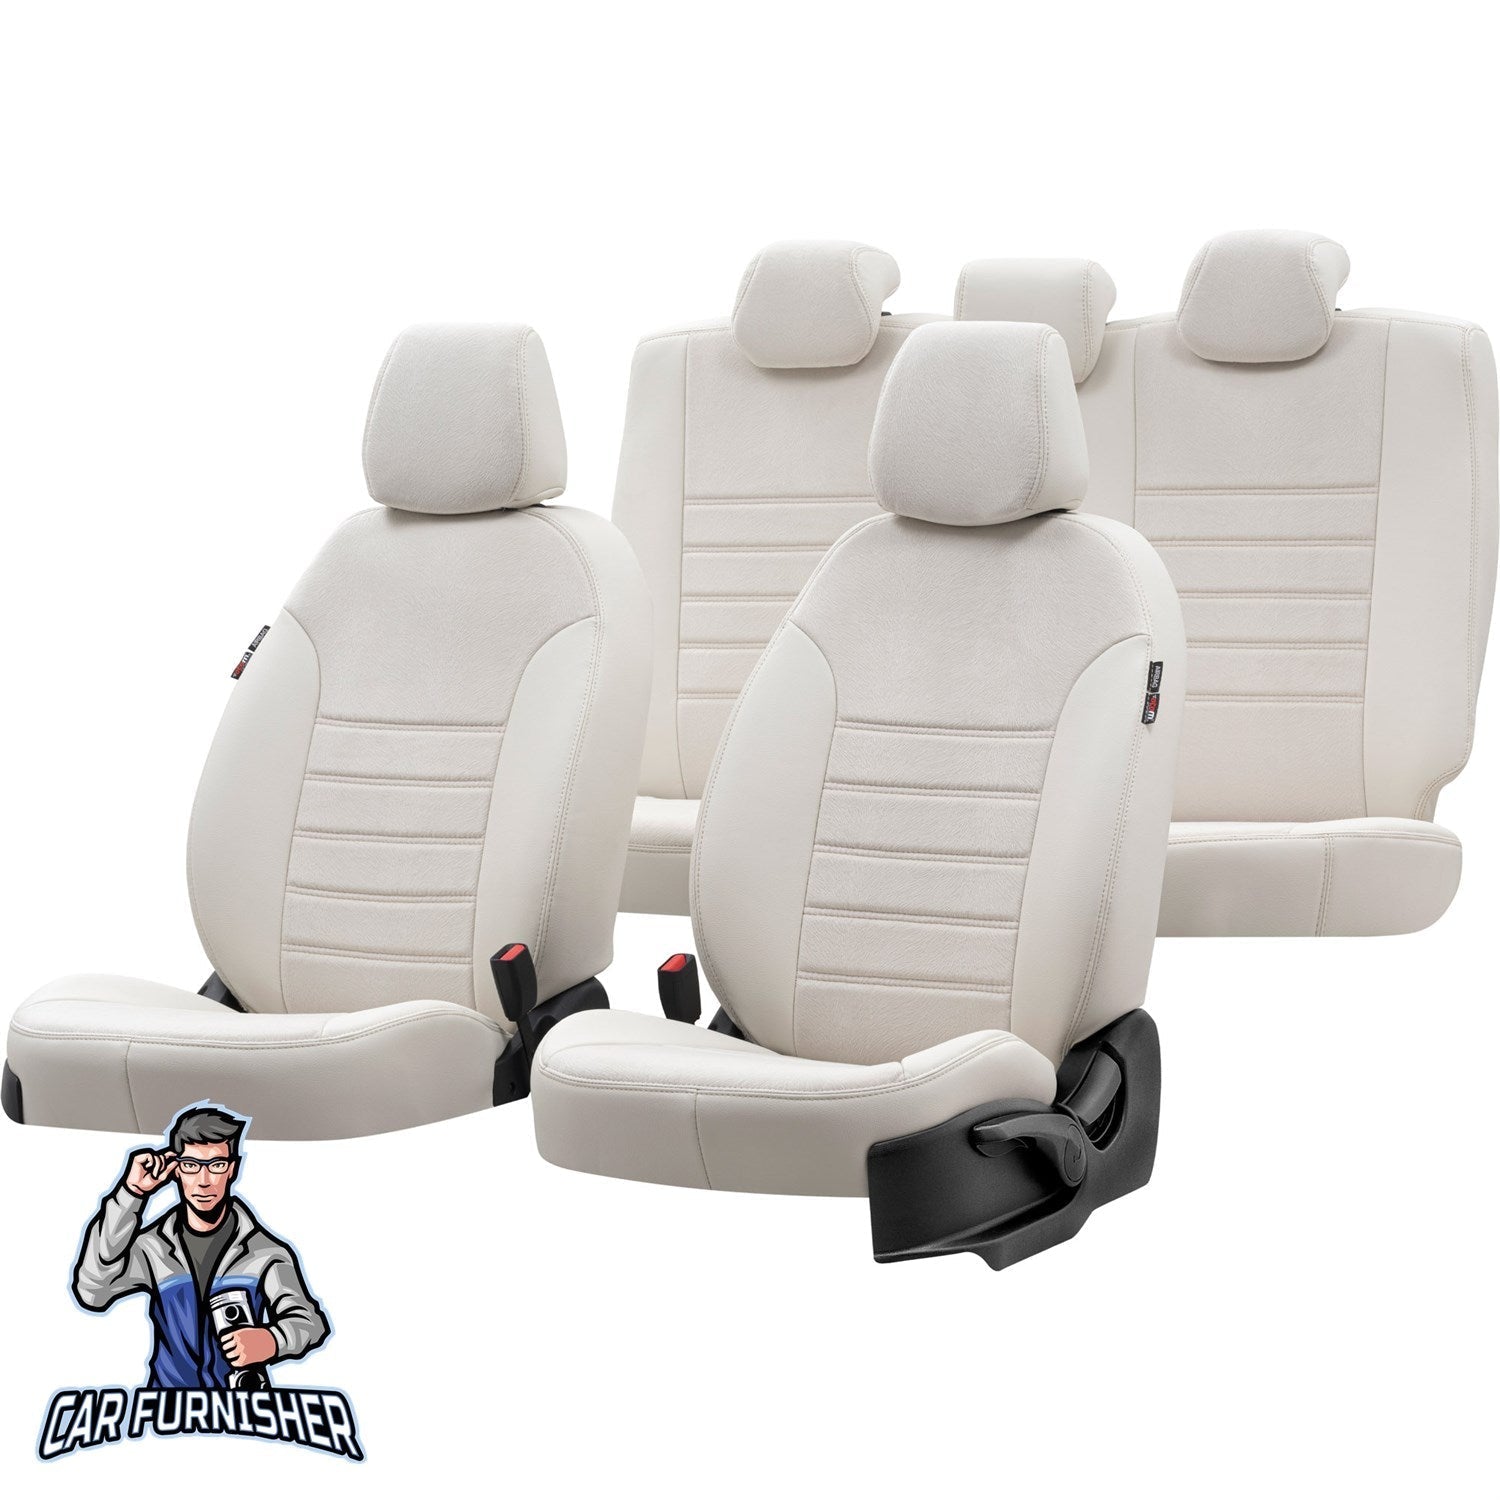 Renault Broadway Car Seat Covers 1983-2001 London Design Ivory Full Set (5 Seats + Handrest) Leather & Fabric